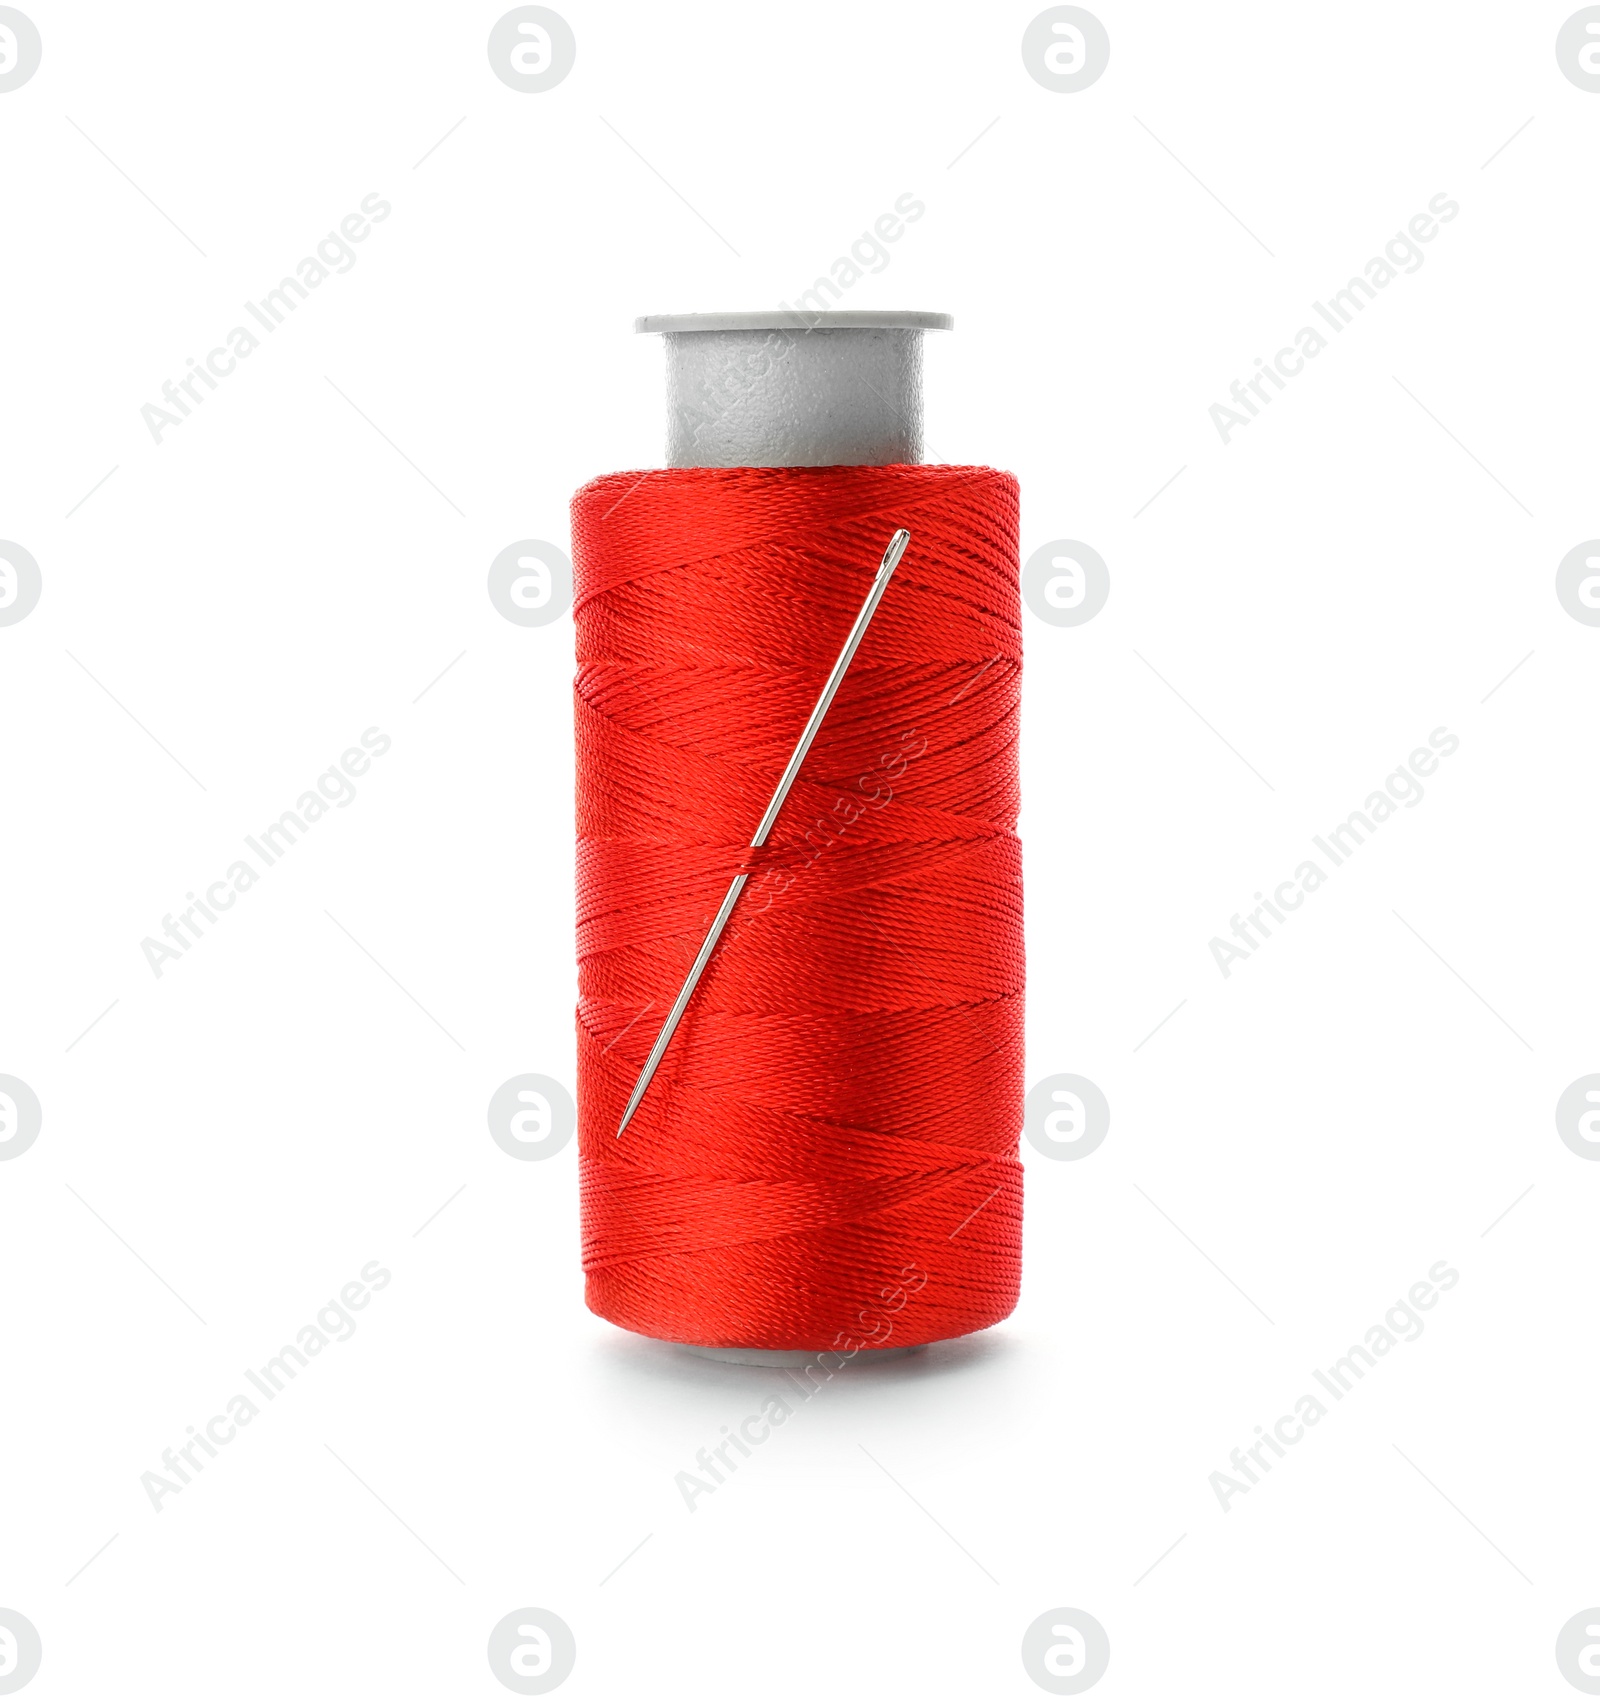 Photo of Color sewing thread with needle on white background